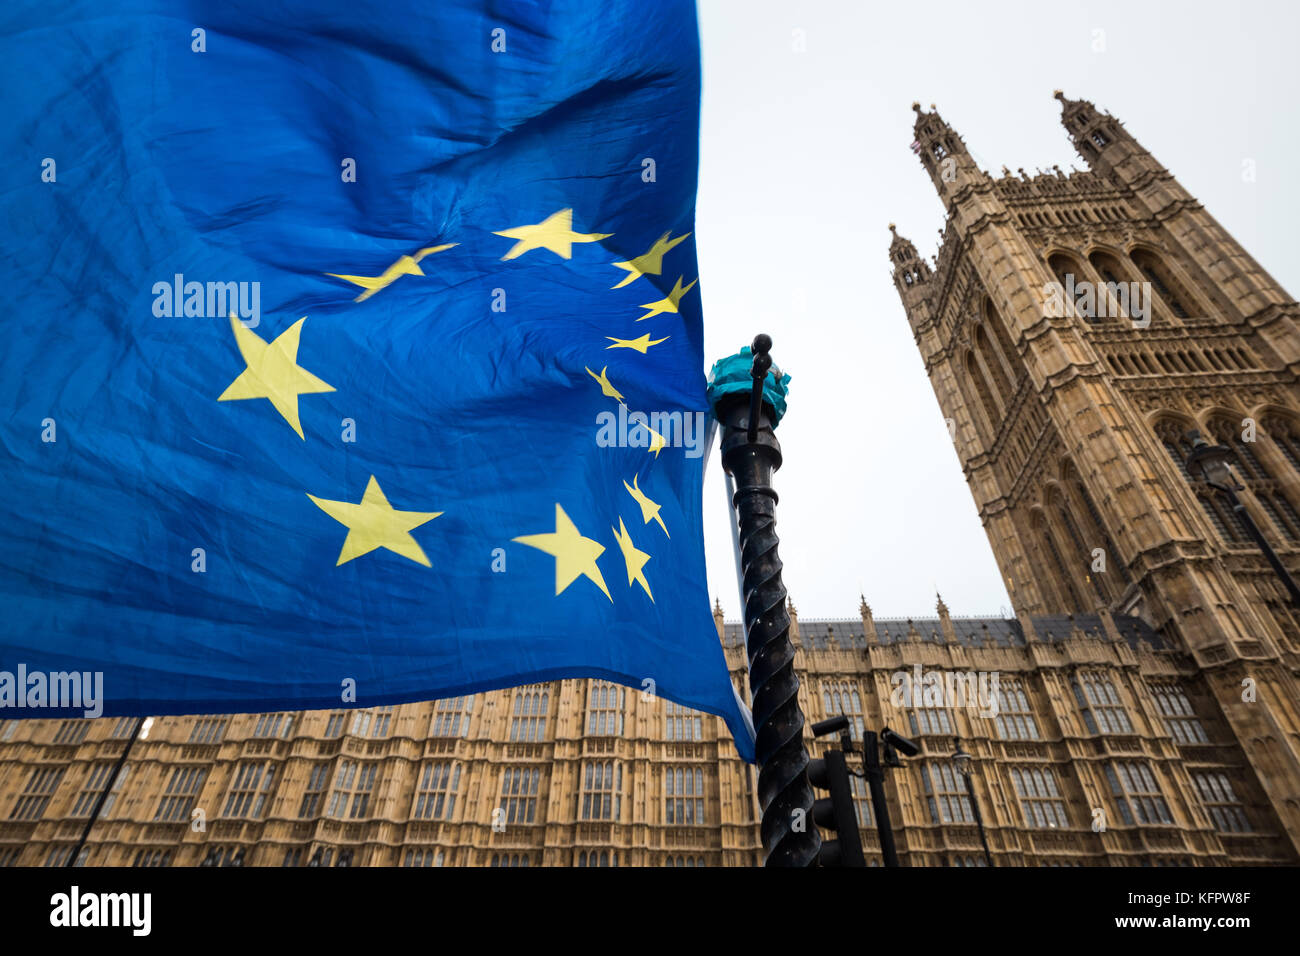 London, UK. 31st Oct, 2017. Flag of European Union flies against Palace of Westminster. Credit: Guy Corbishley/Alamy Live News Stock Photo